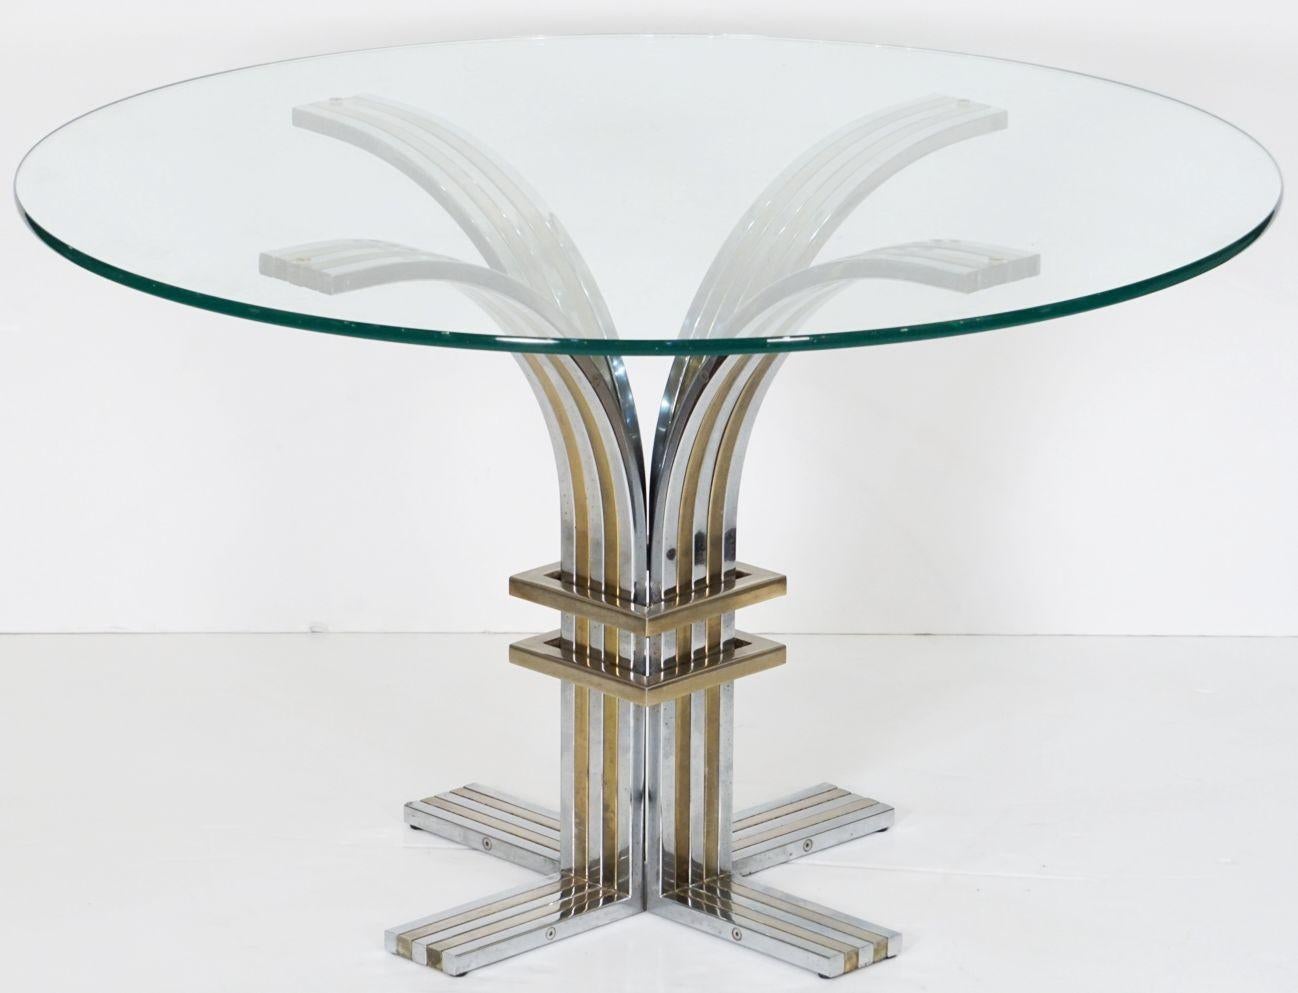 A fine Modernist dining or center table from Italy, circa 1970, featuring four arches over a cross shaped base of chrome metal and brass with a round glass top, attributed to the celebrated Italian designer, Romeo Rega.

Italian designer Romeo Rega